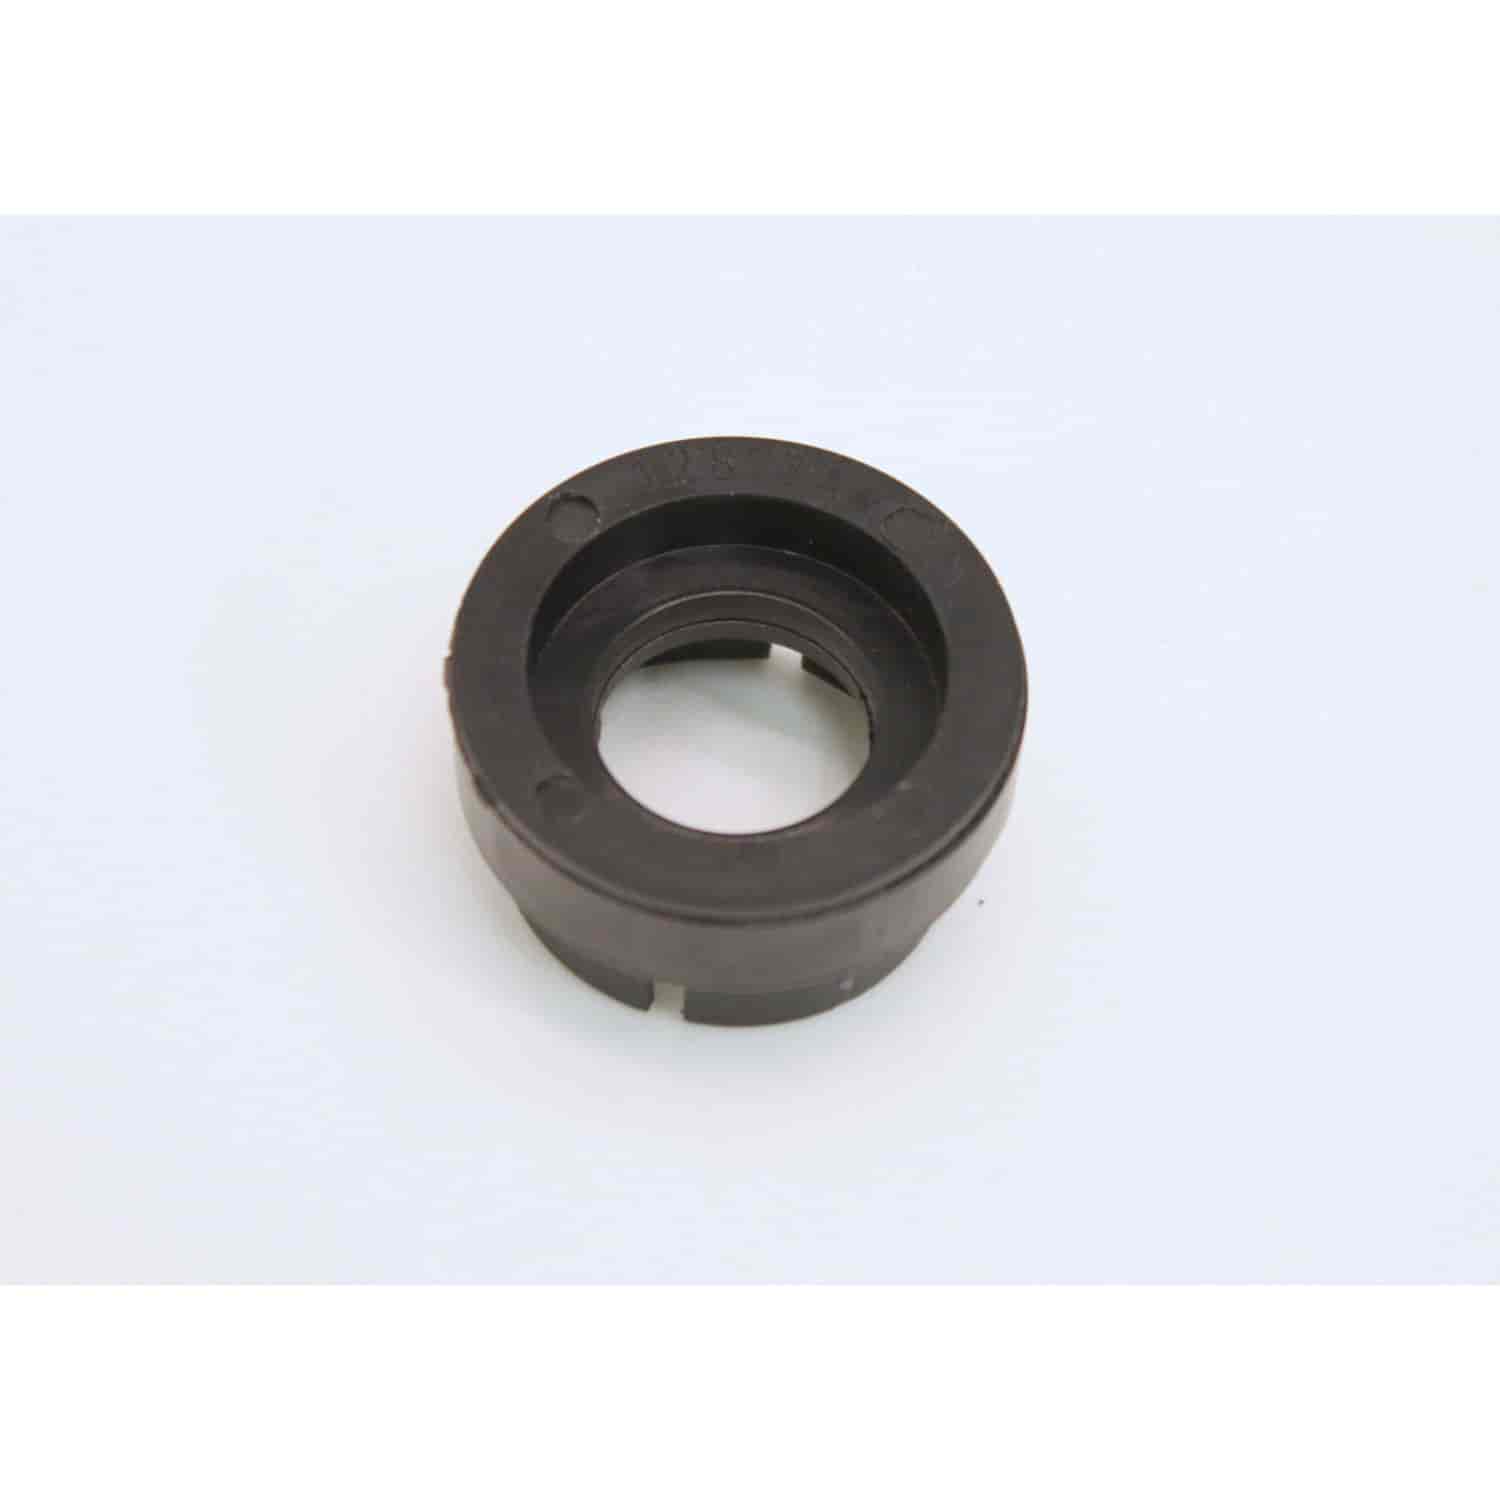 Replacement Ignitor Magnet Sleeve For Use With 751-1281